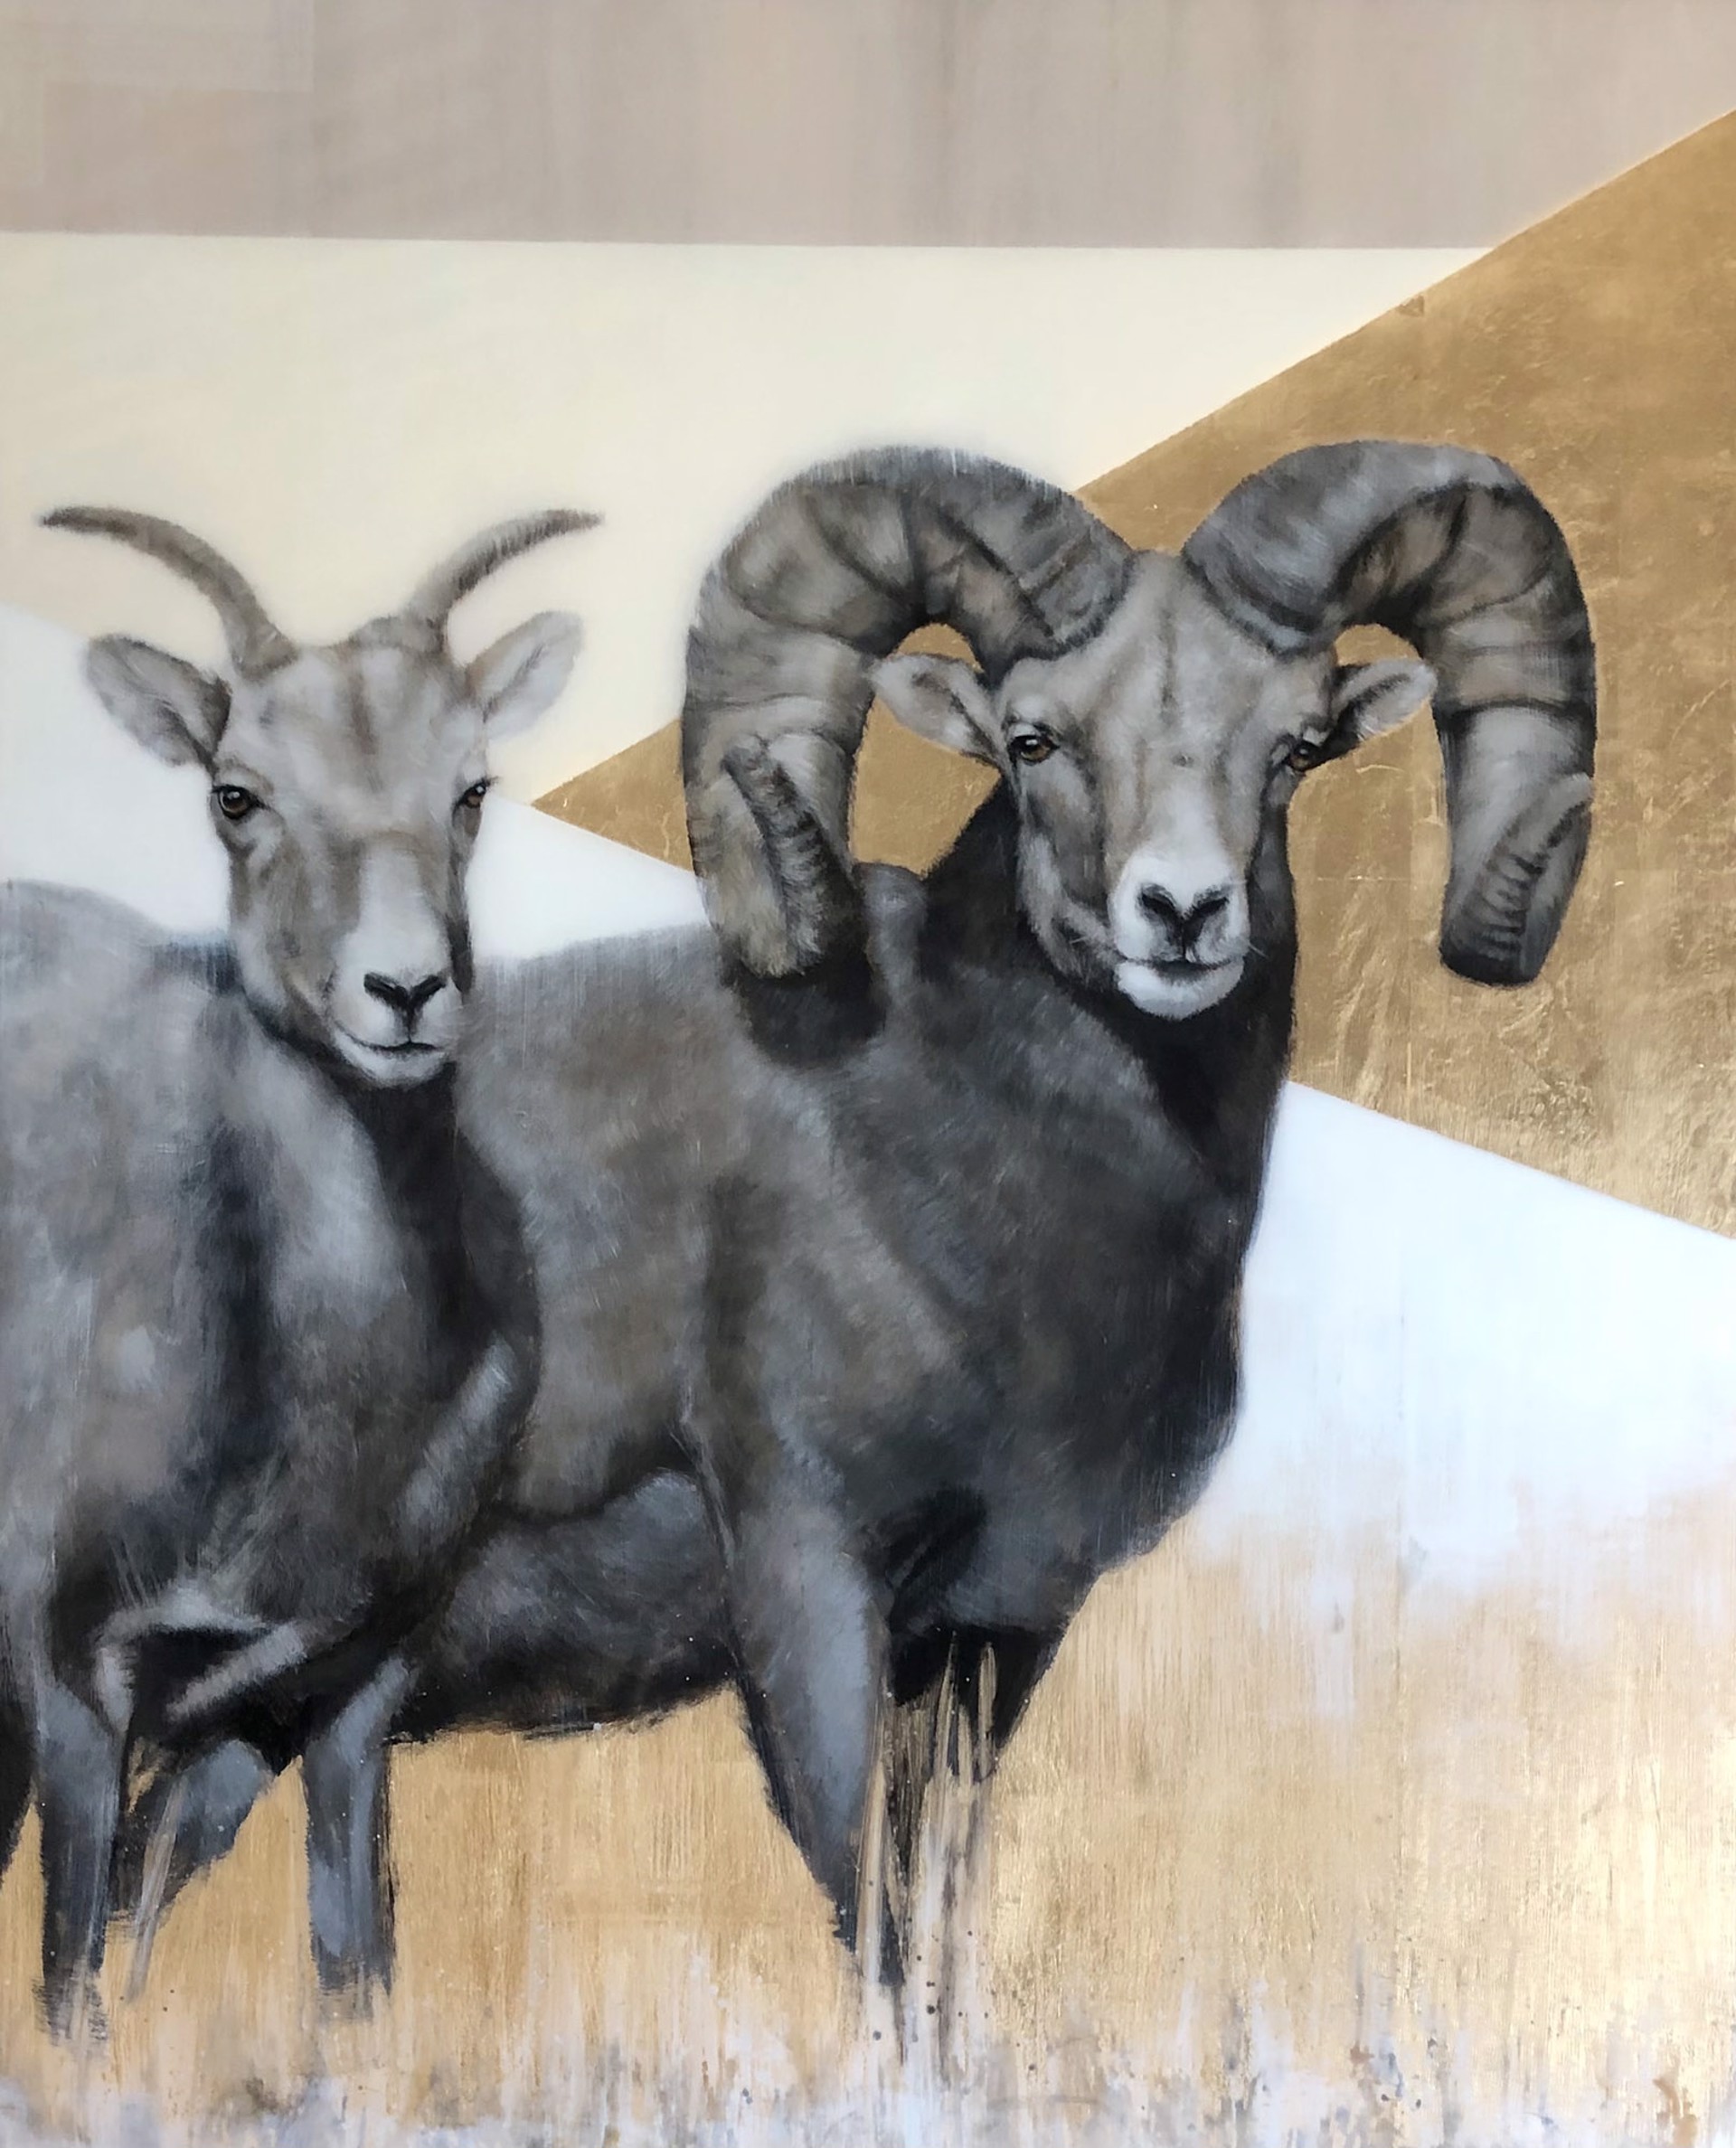 Doe And Ram, Big Horn Sheep, Painted In Black And White, with Graphic Gold Triangular Background.